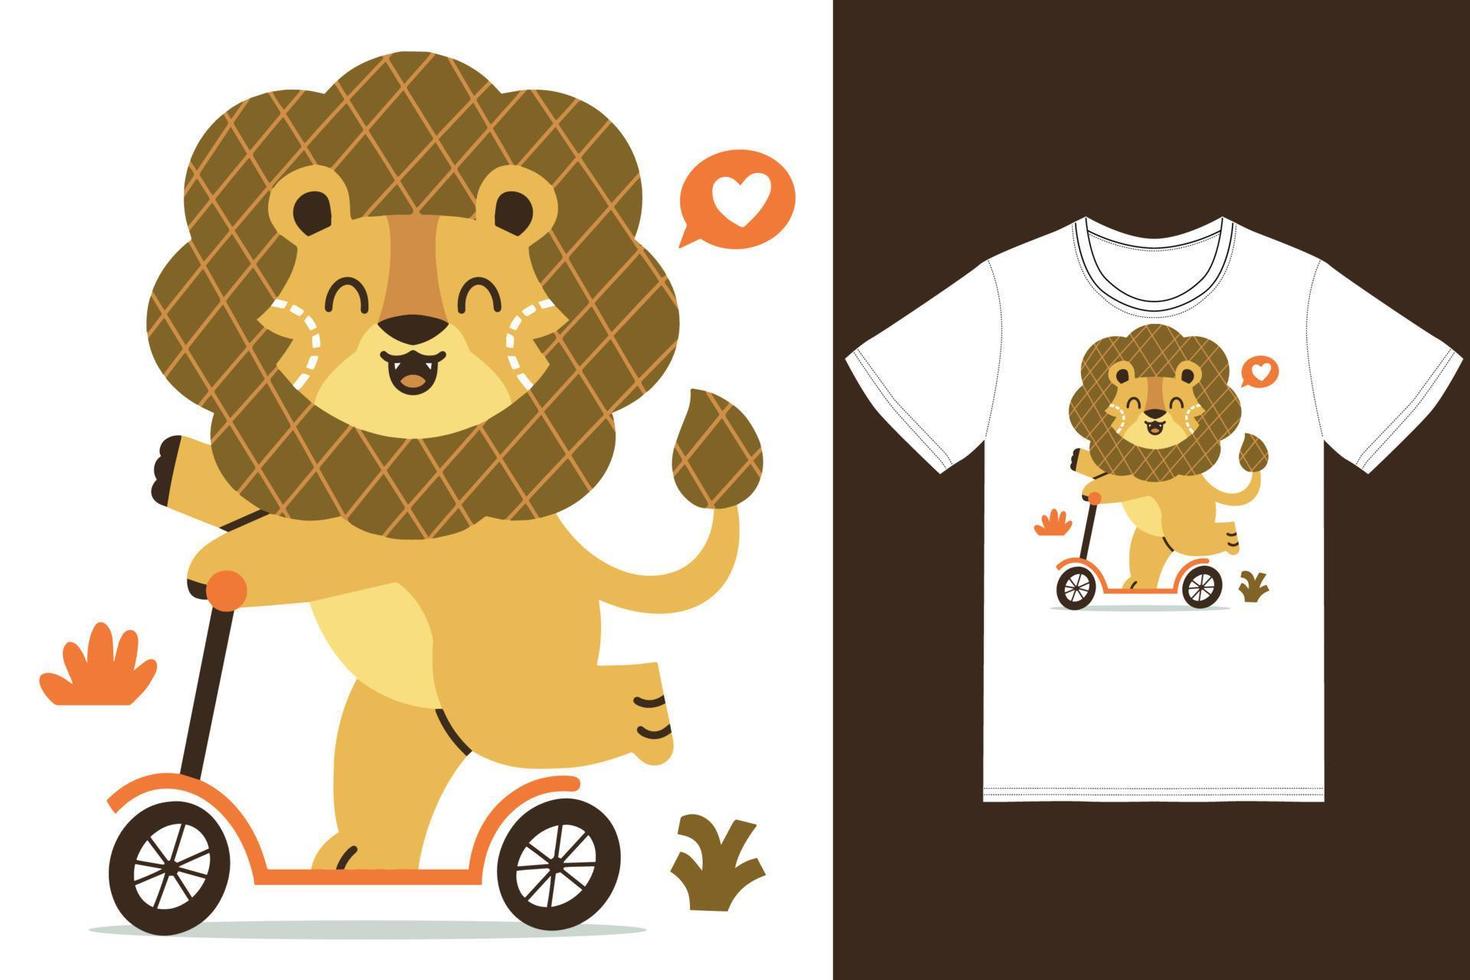 Cute lion riding scooter illustration with tshirt design premium vector